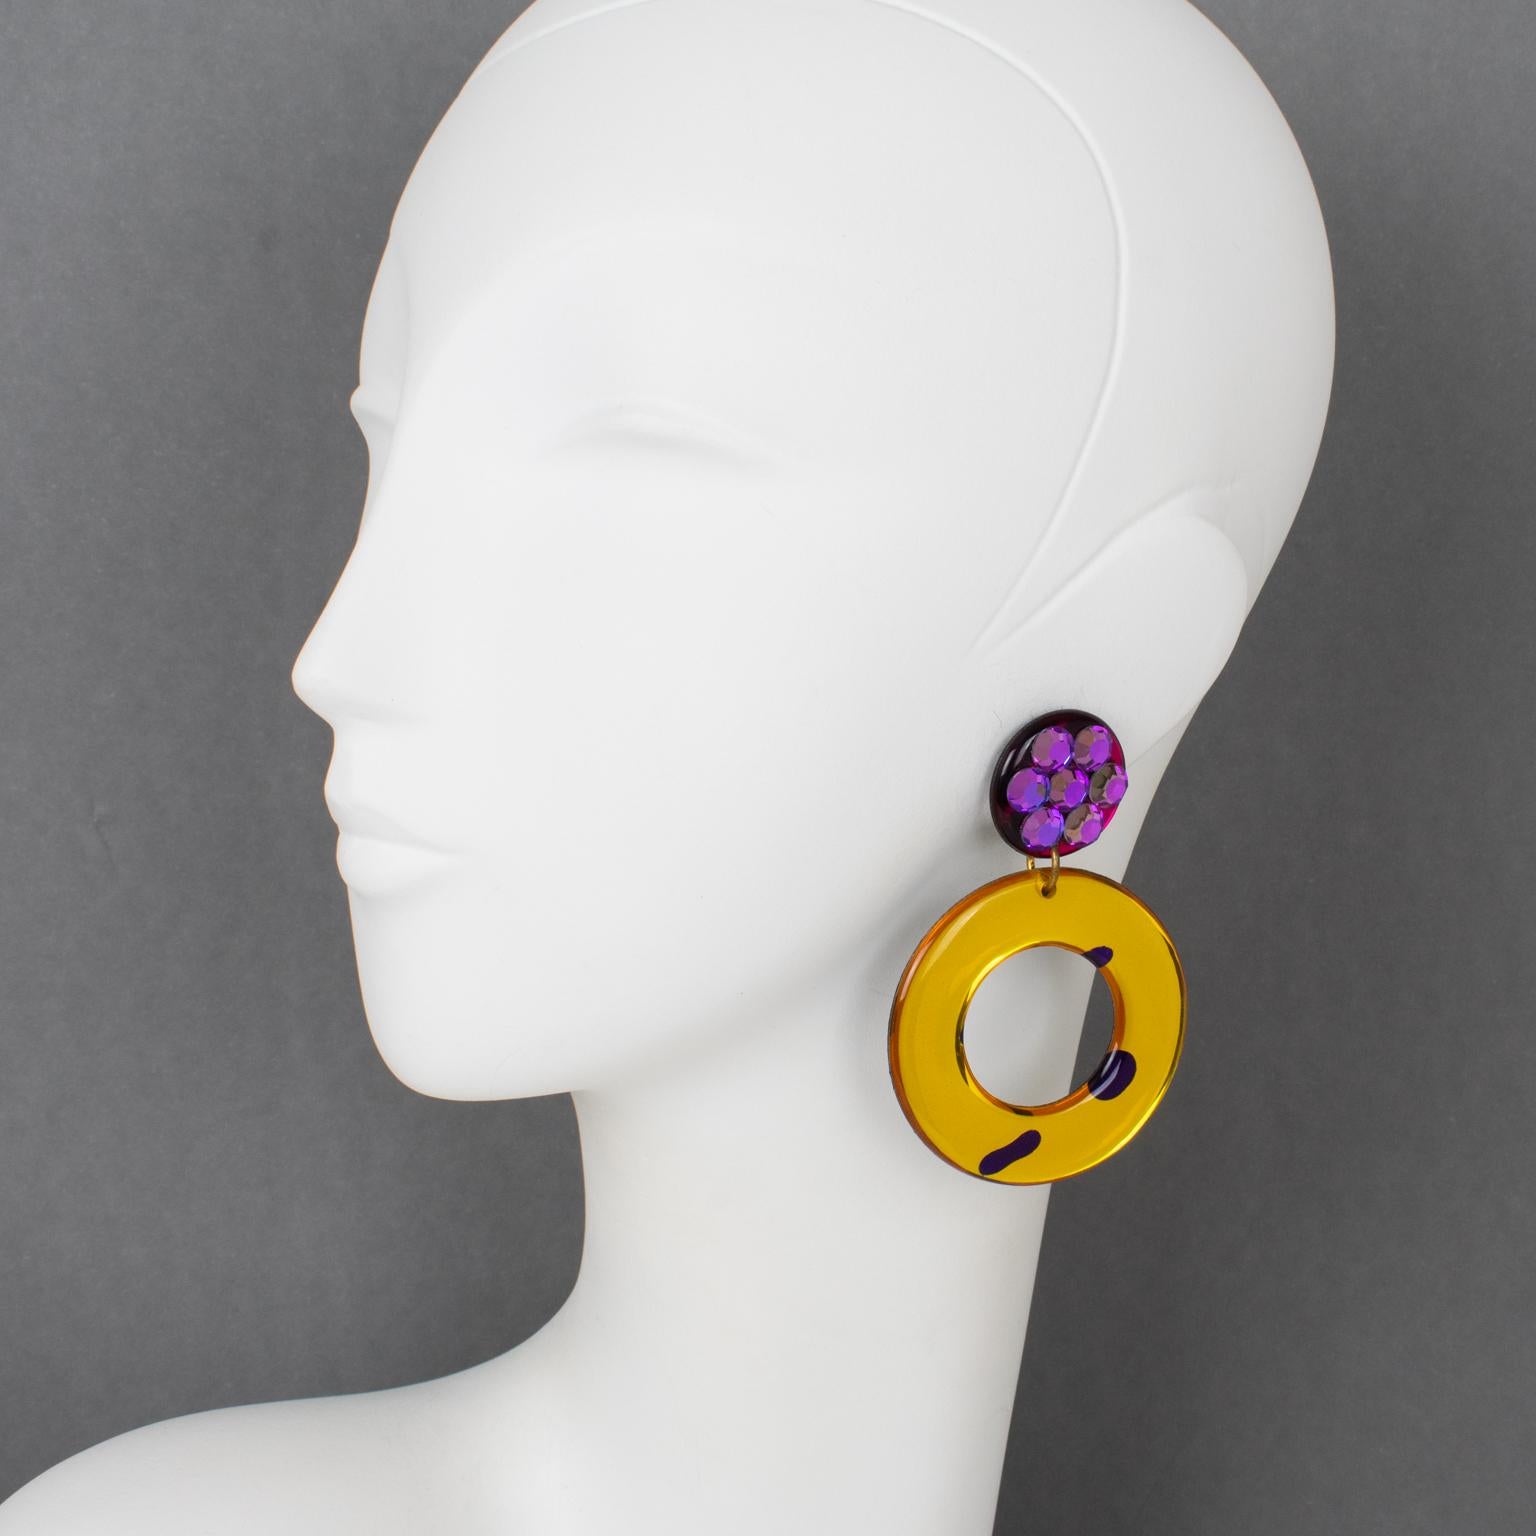 These stunning Lucite or Resin dangling clip-on earrings feature an oversized geometric design built with donut shapes in yellow saffron, amethyst purple, and hot fuchsia pink colors with a mirror effect and textured pattern. The earrings are ornate